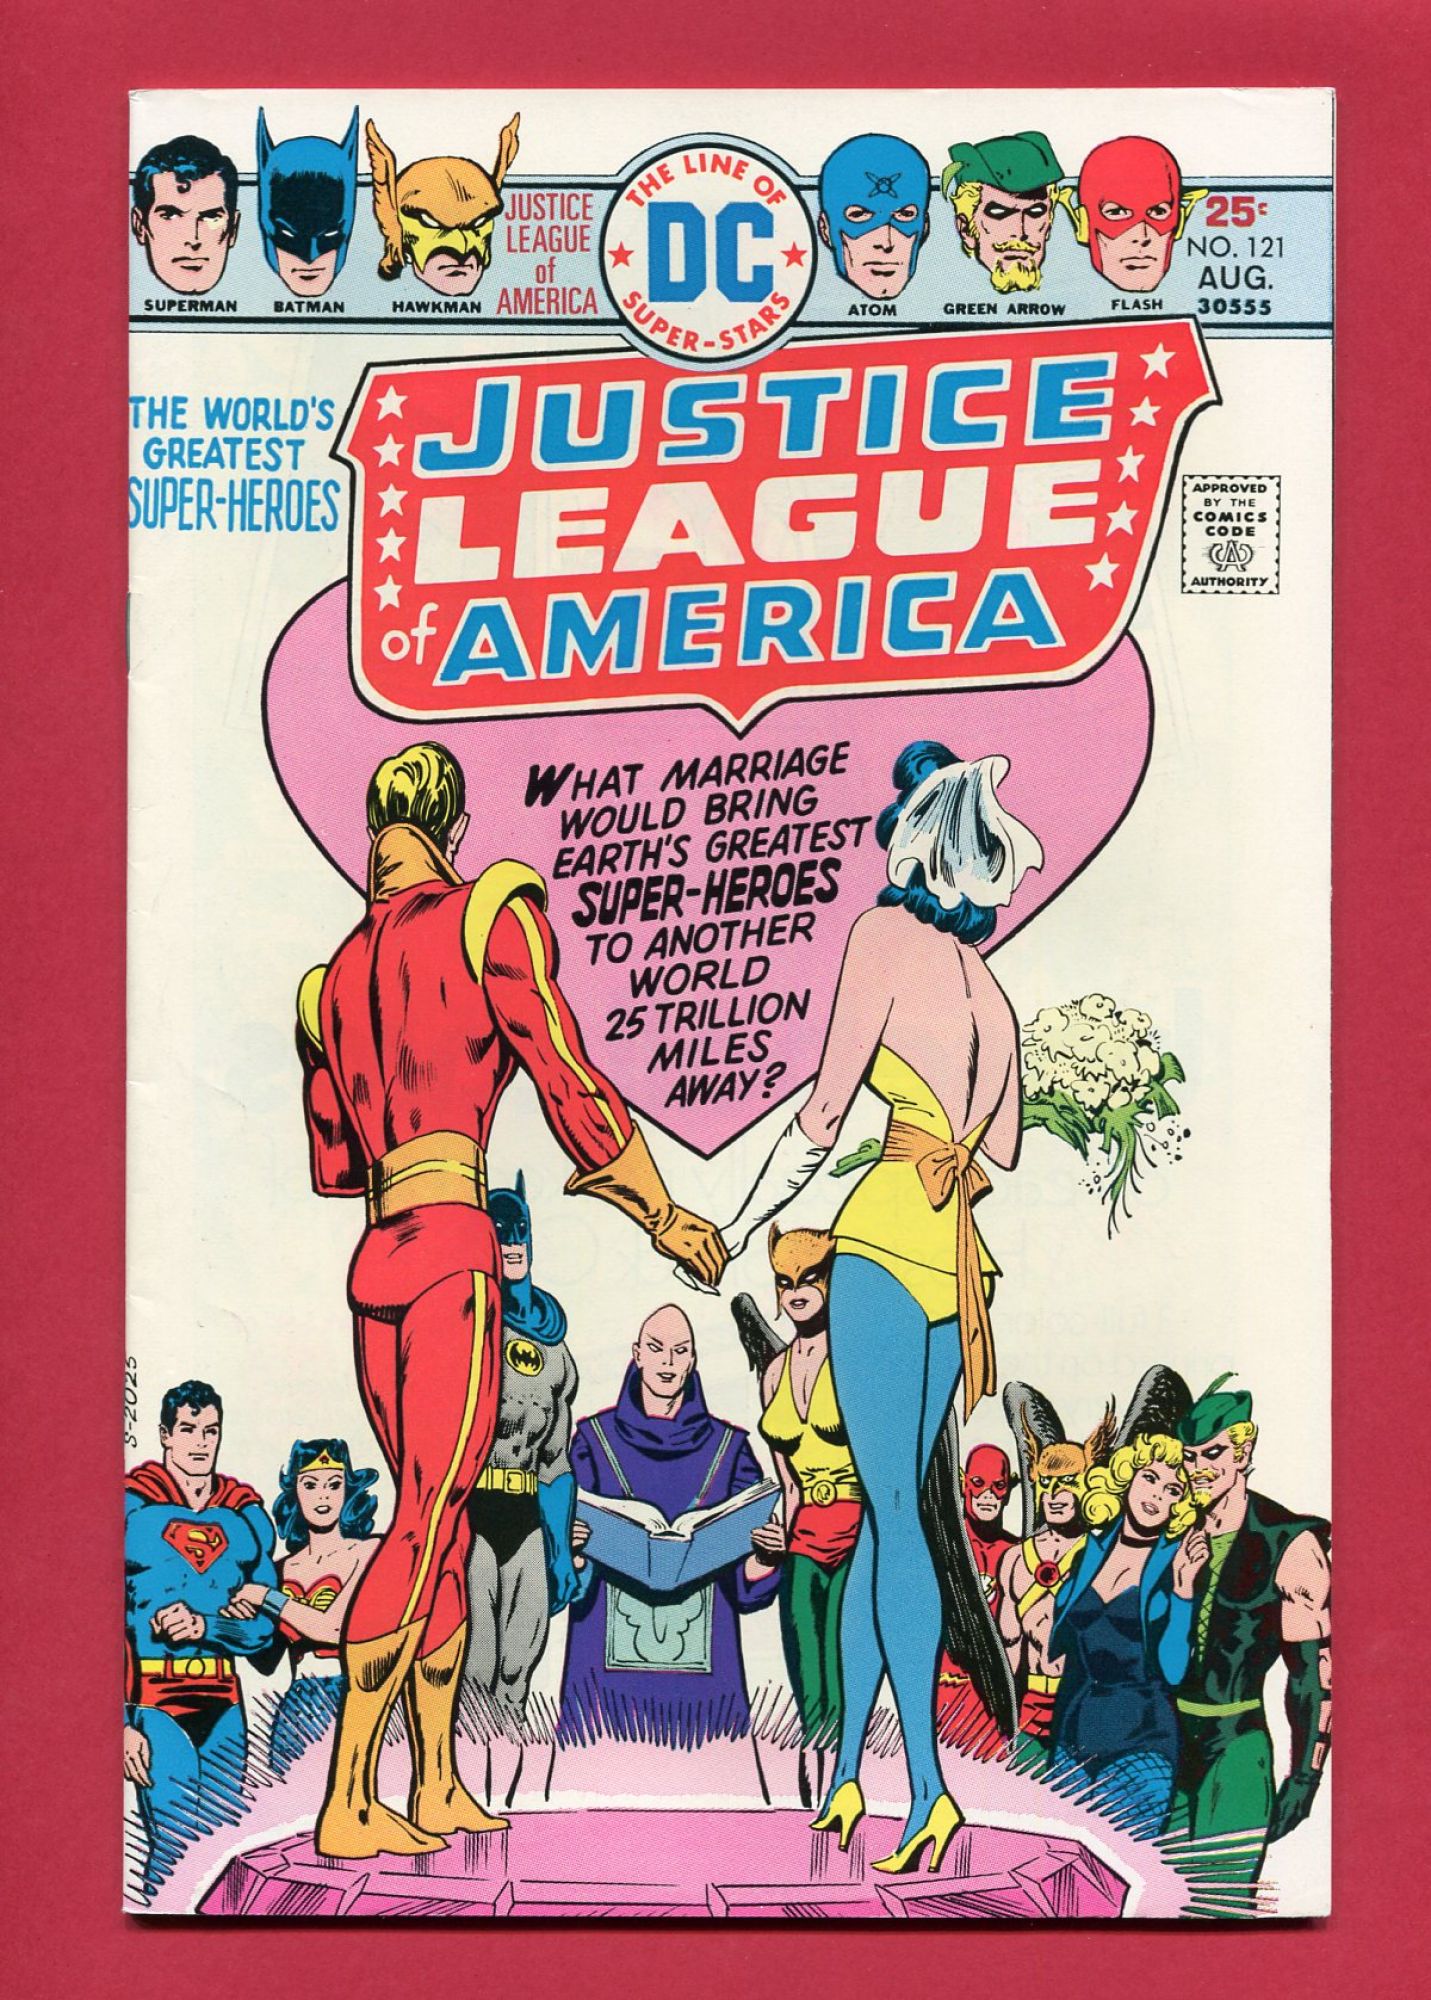 Justice League of America #121, Aug 1975, 7.0 FN/VF